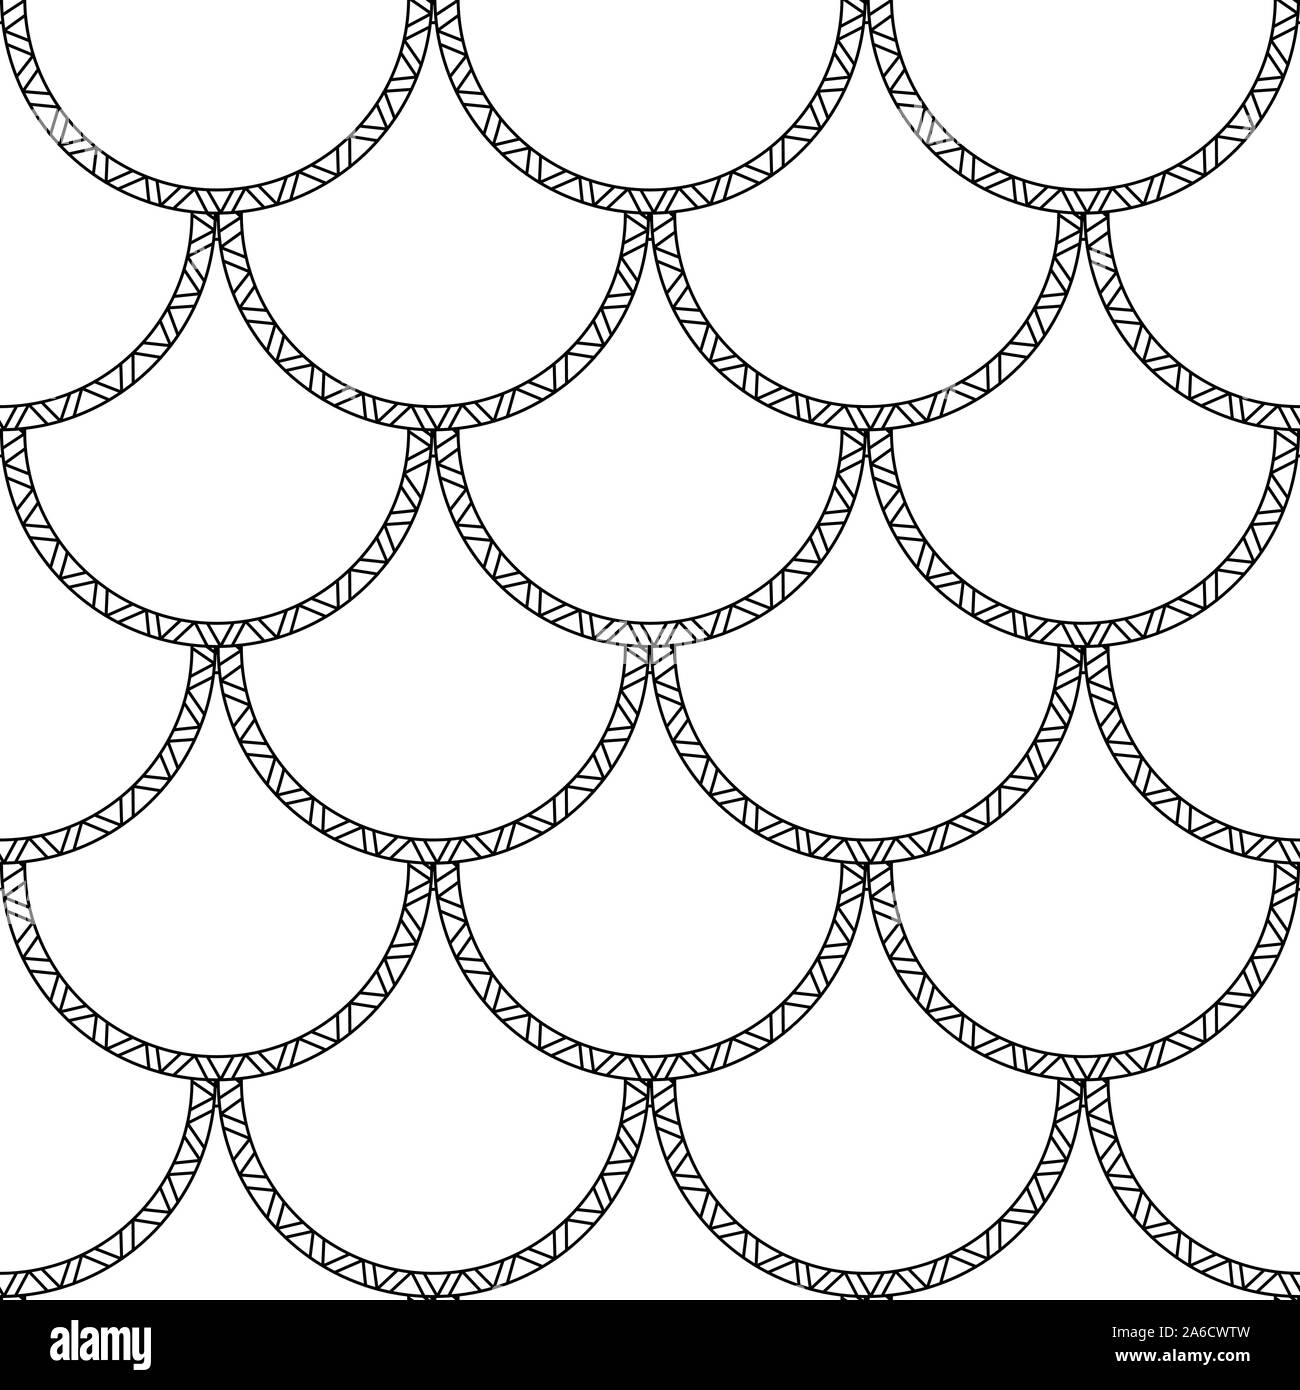 Vector mermaid tail texture. Black fish scales seamless pattern on white background Stock Vector